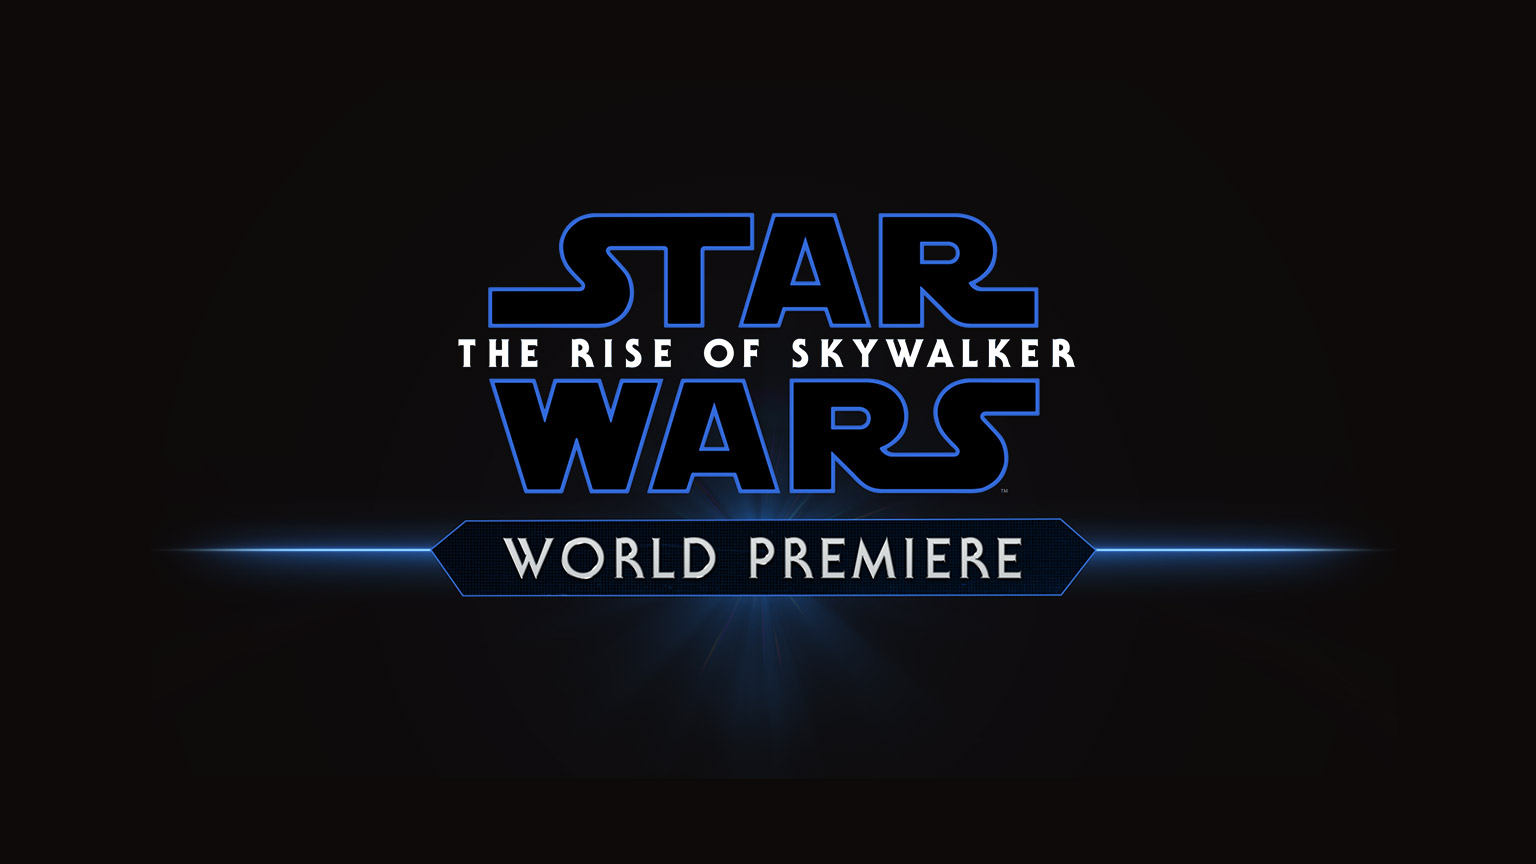 Watch The Red Carpet Premiere For The Rise Of Skywalker LIVE